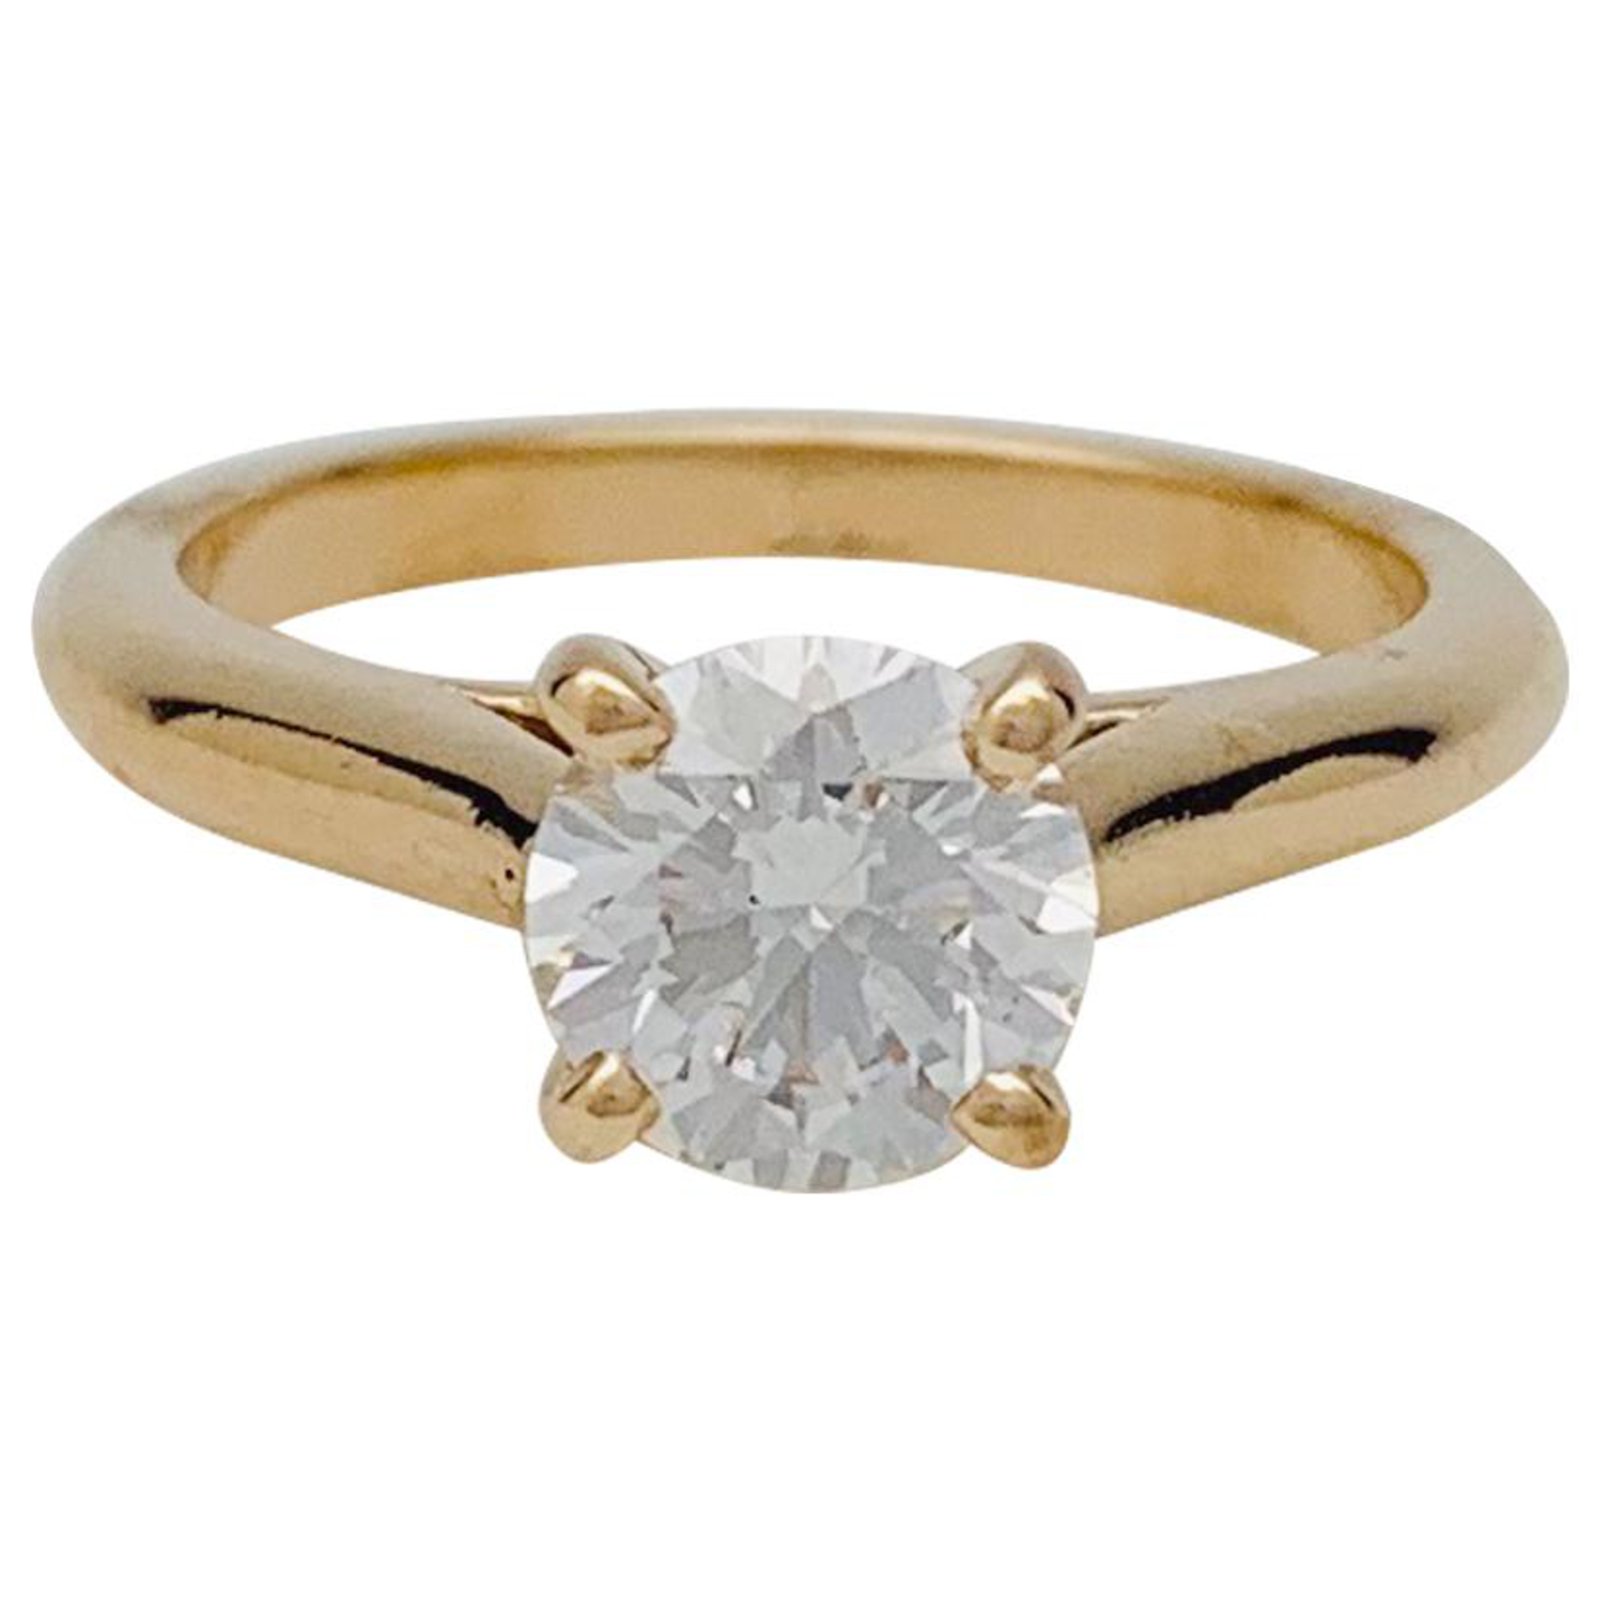 cartier yellow gold solitaire